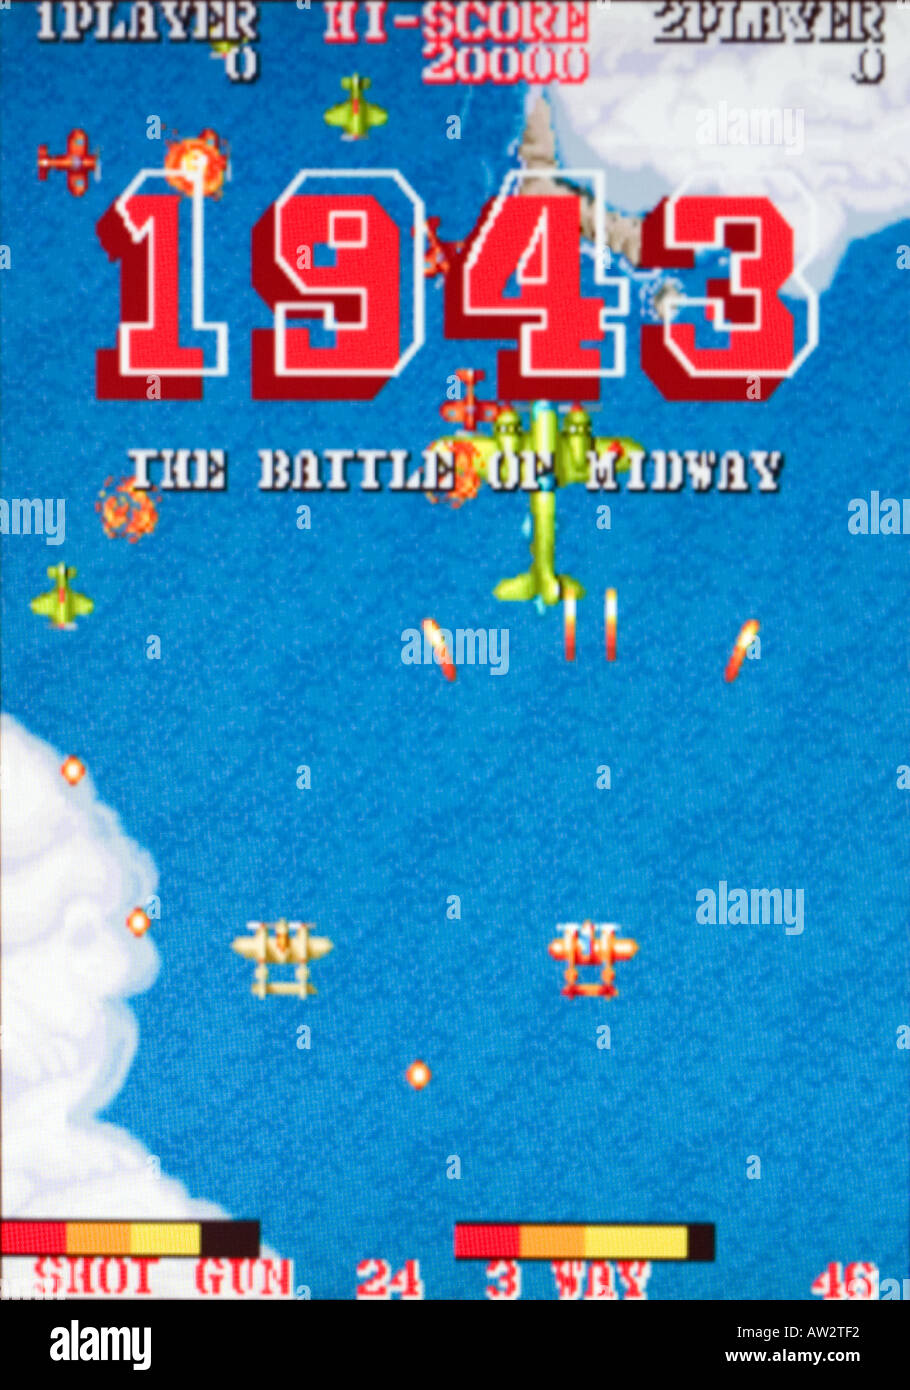 1943-the-battle-of-midway-capcom-vintage-arcade-videogame-screen-shot-AW2TF2.jpg